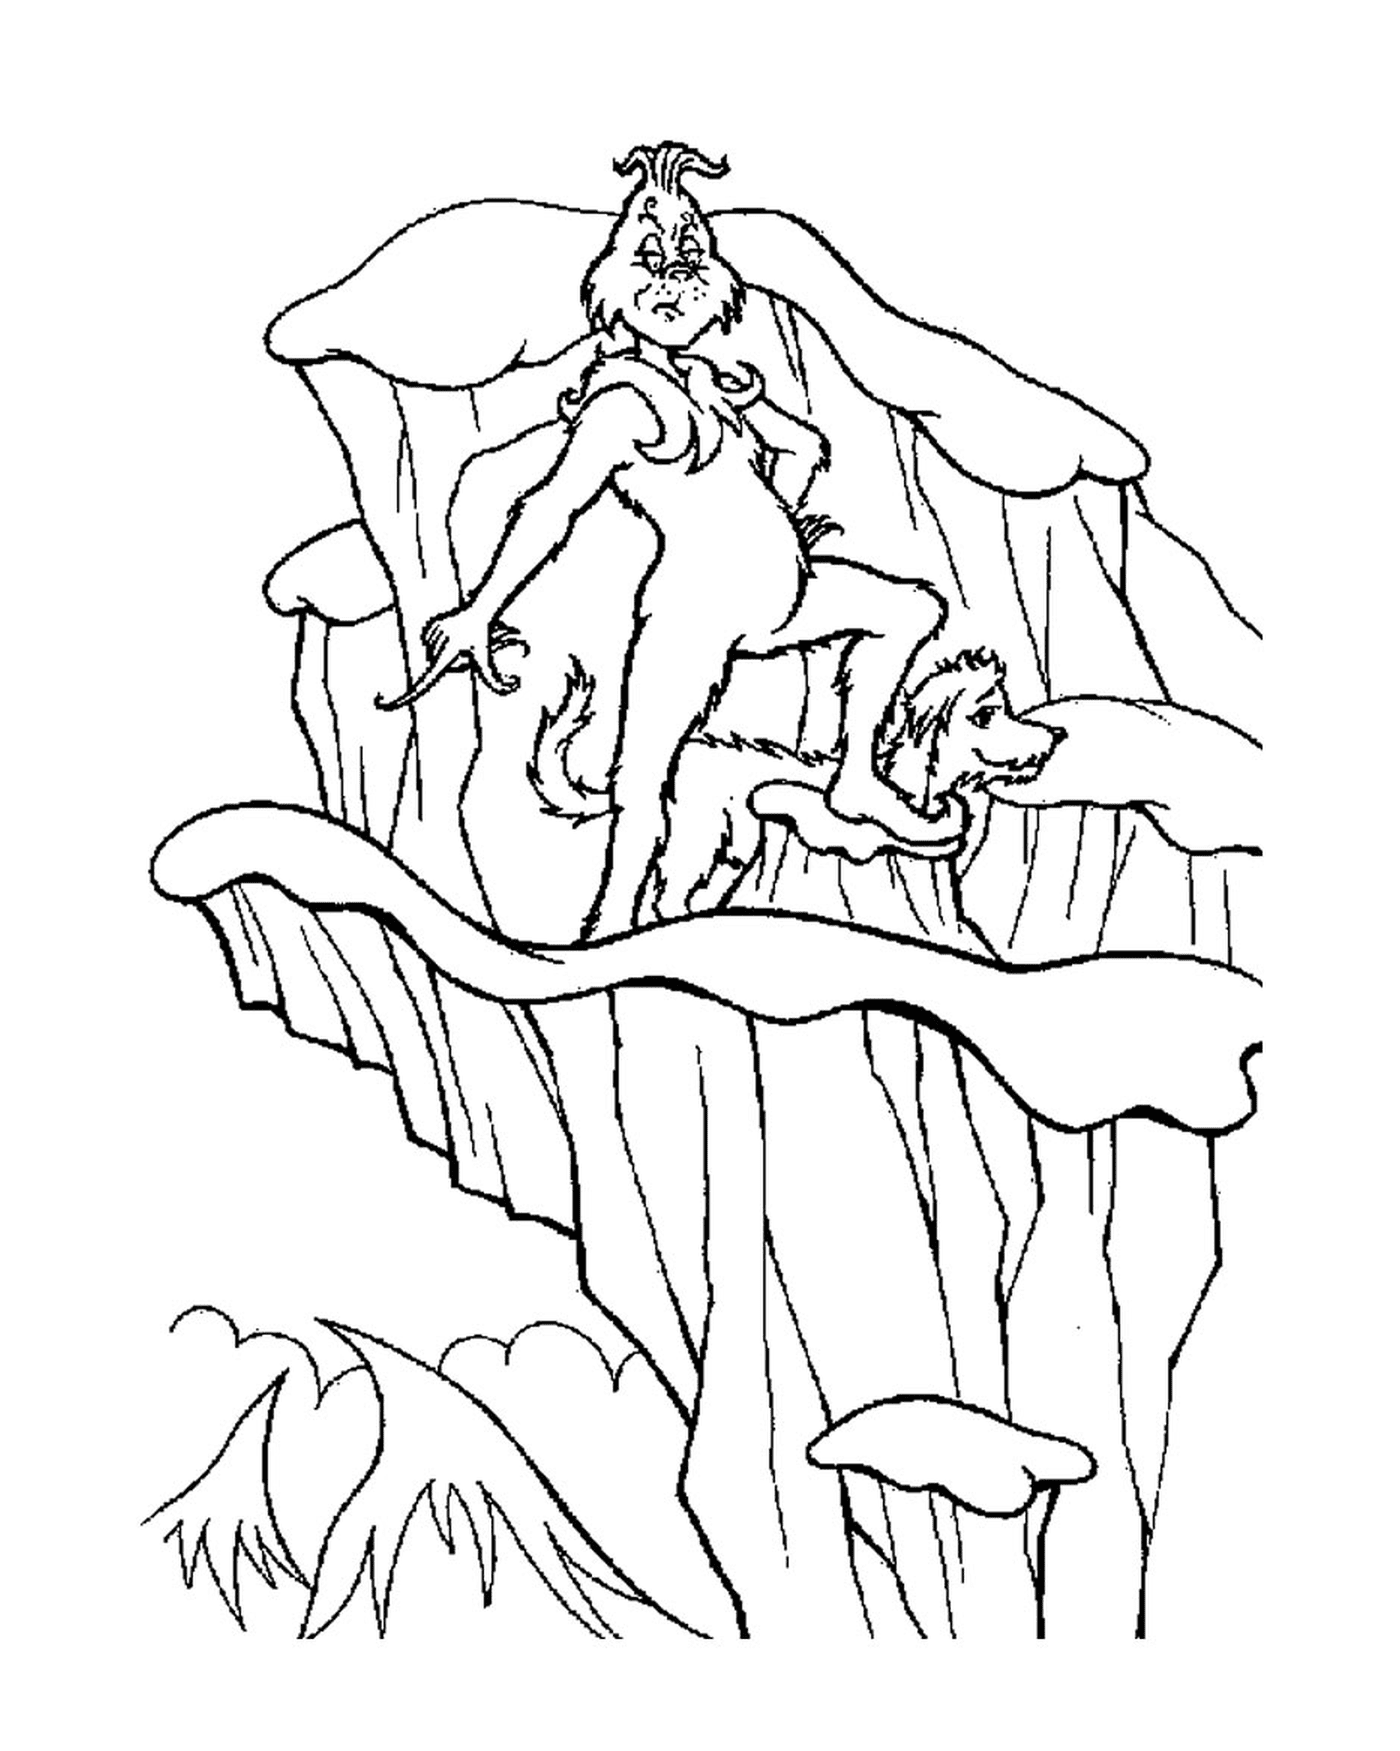  Grinch on mountain with dog 